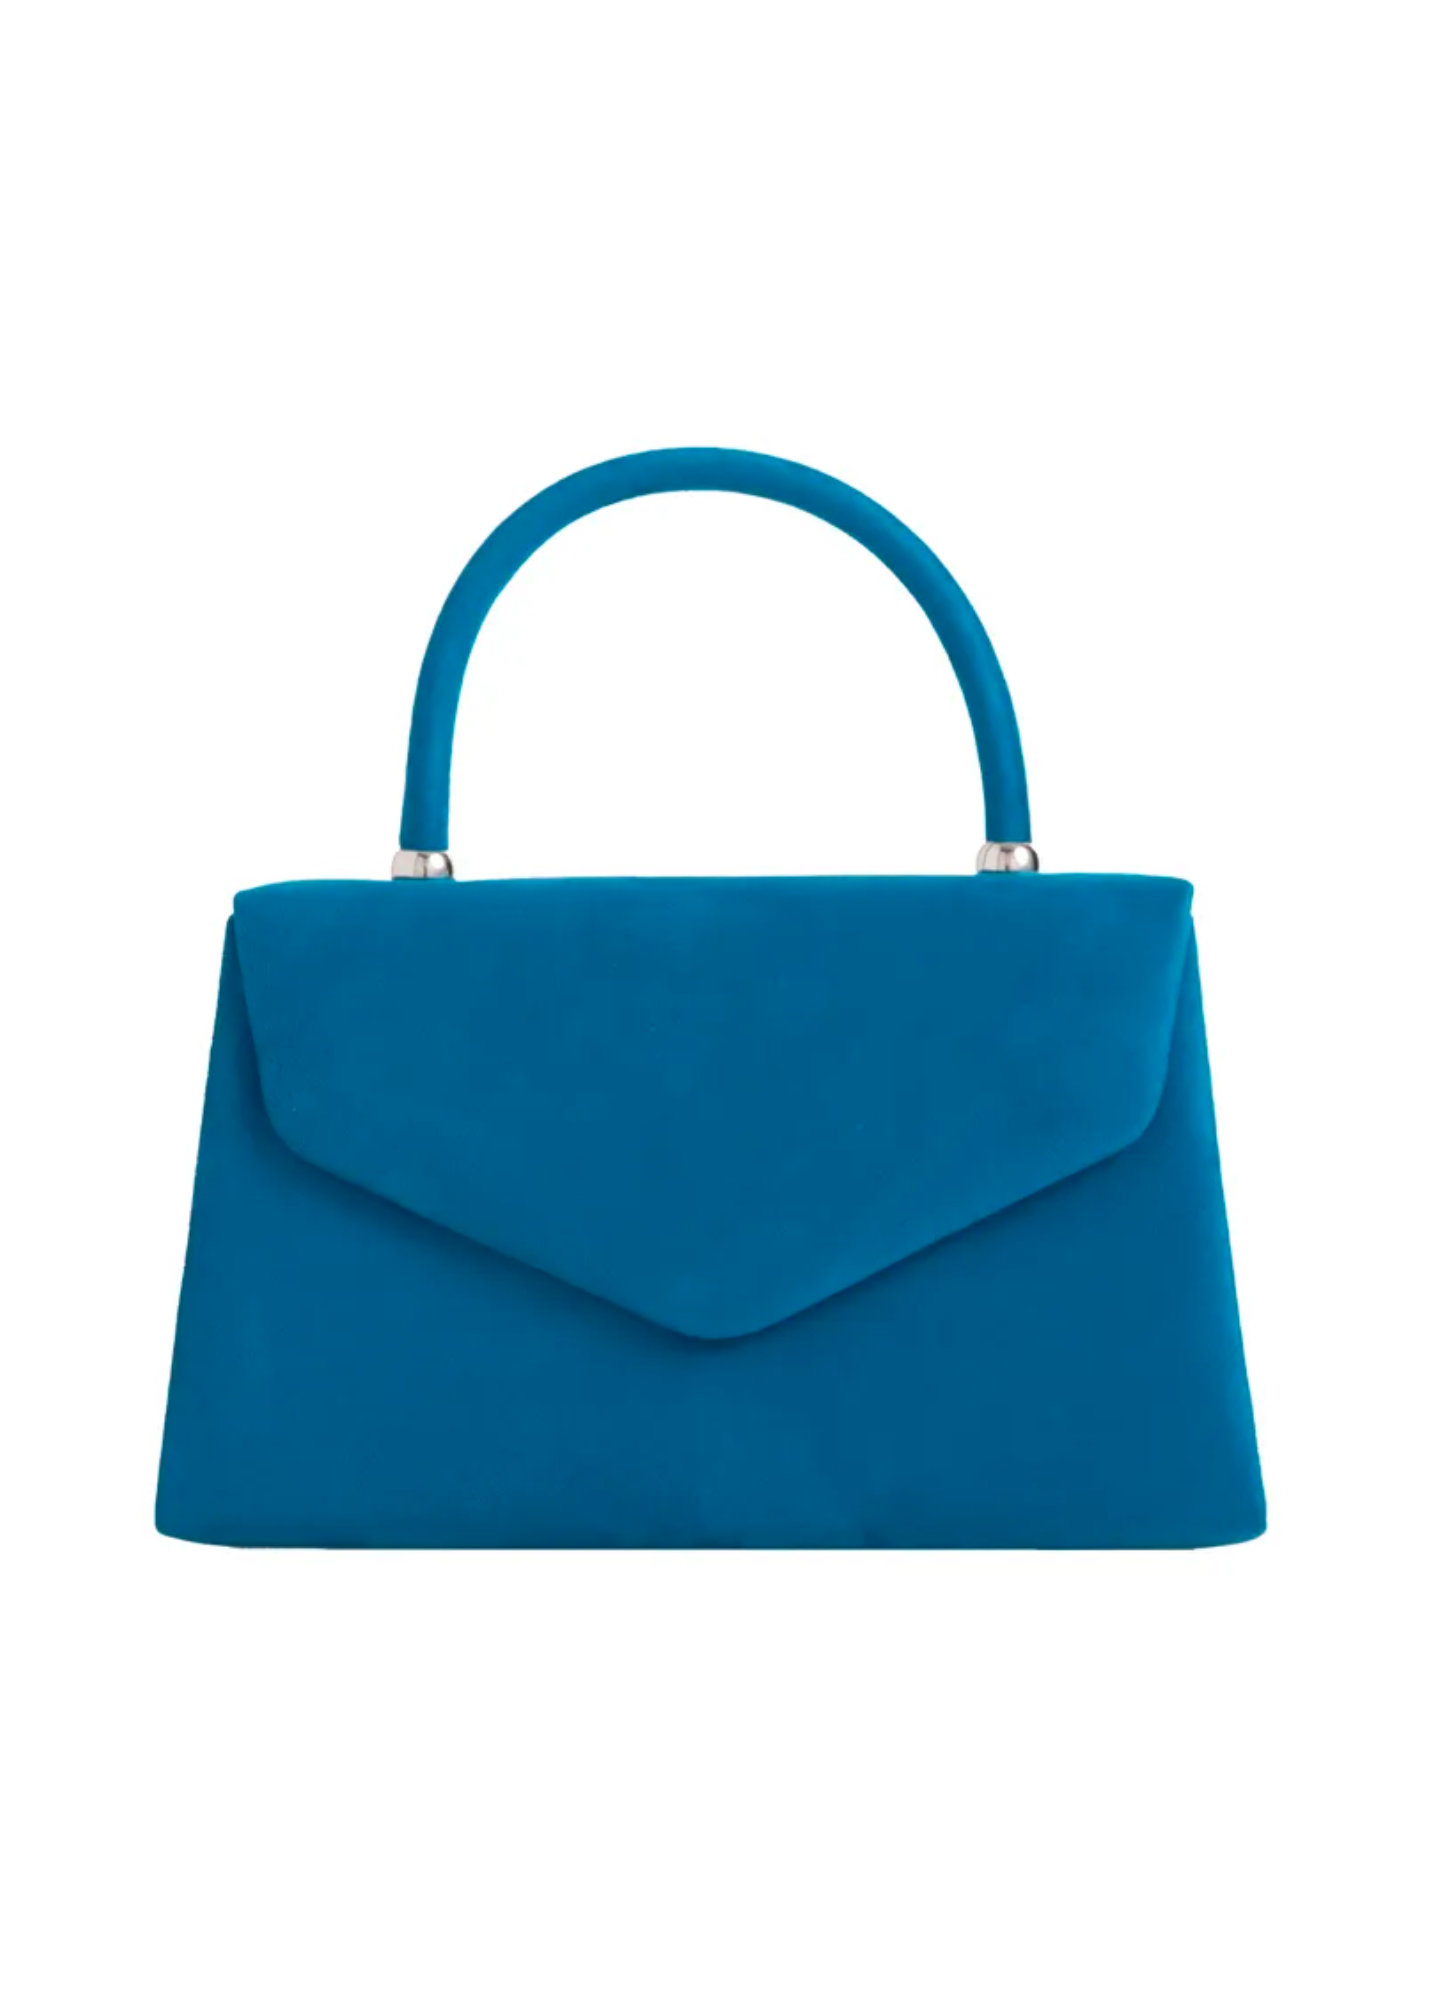 Thunder Egg - Soft Faux Suede Grab Bag in Rich Teal